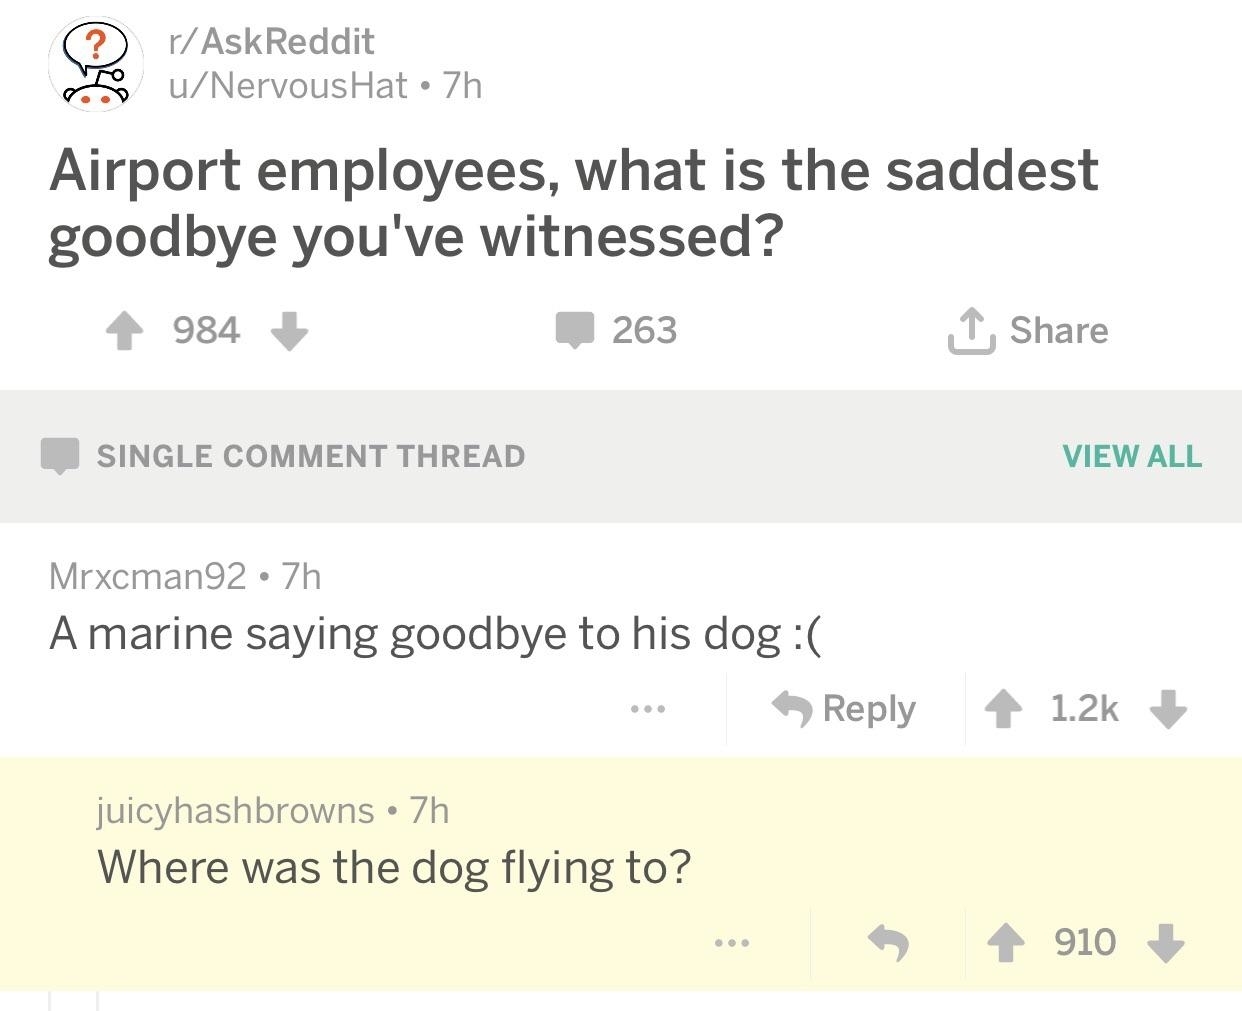 &quot;Airport employees, what is the saddest goodbye you&#x27;ve witnessed?&quot; &quot;responses: &quot;A Marine saying goodbye to his dog&quot;; &quot;Where was the dog flying to?&quot;